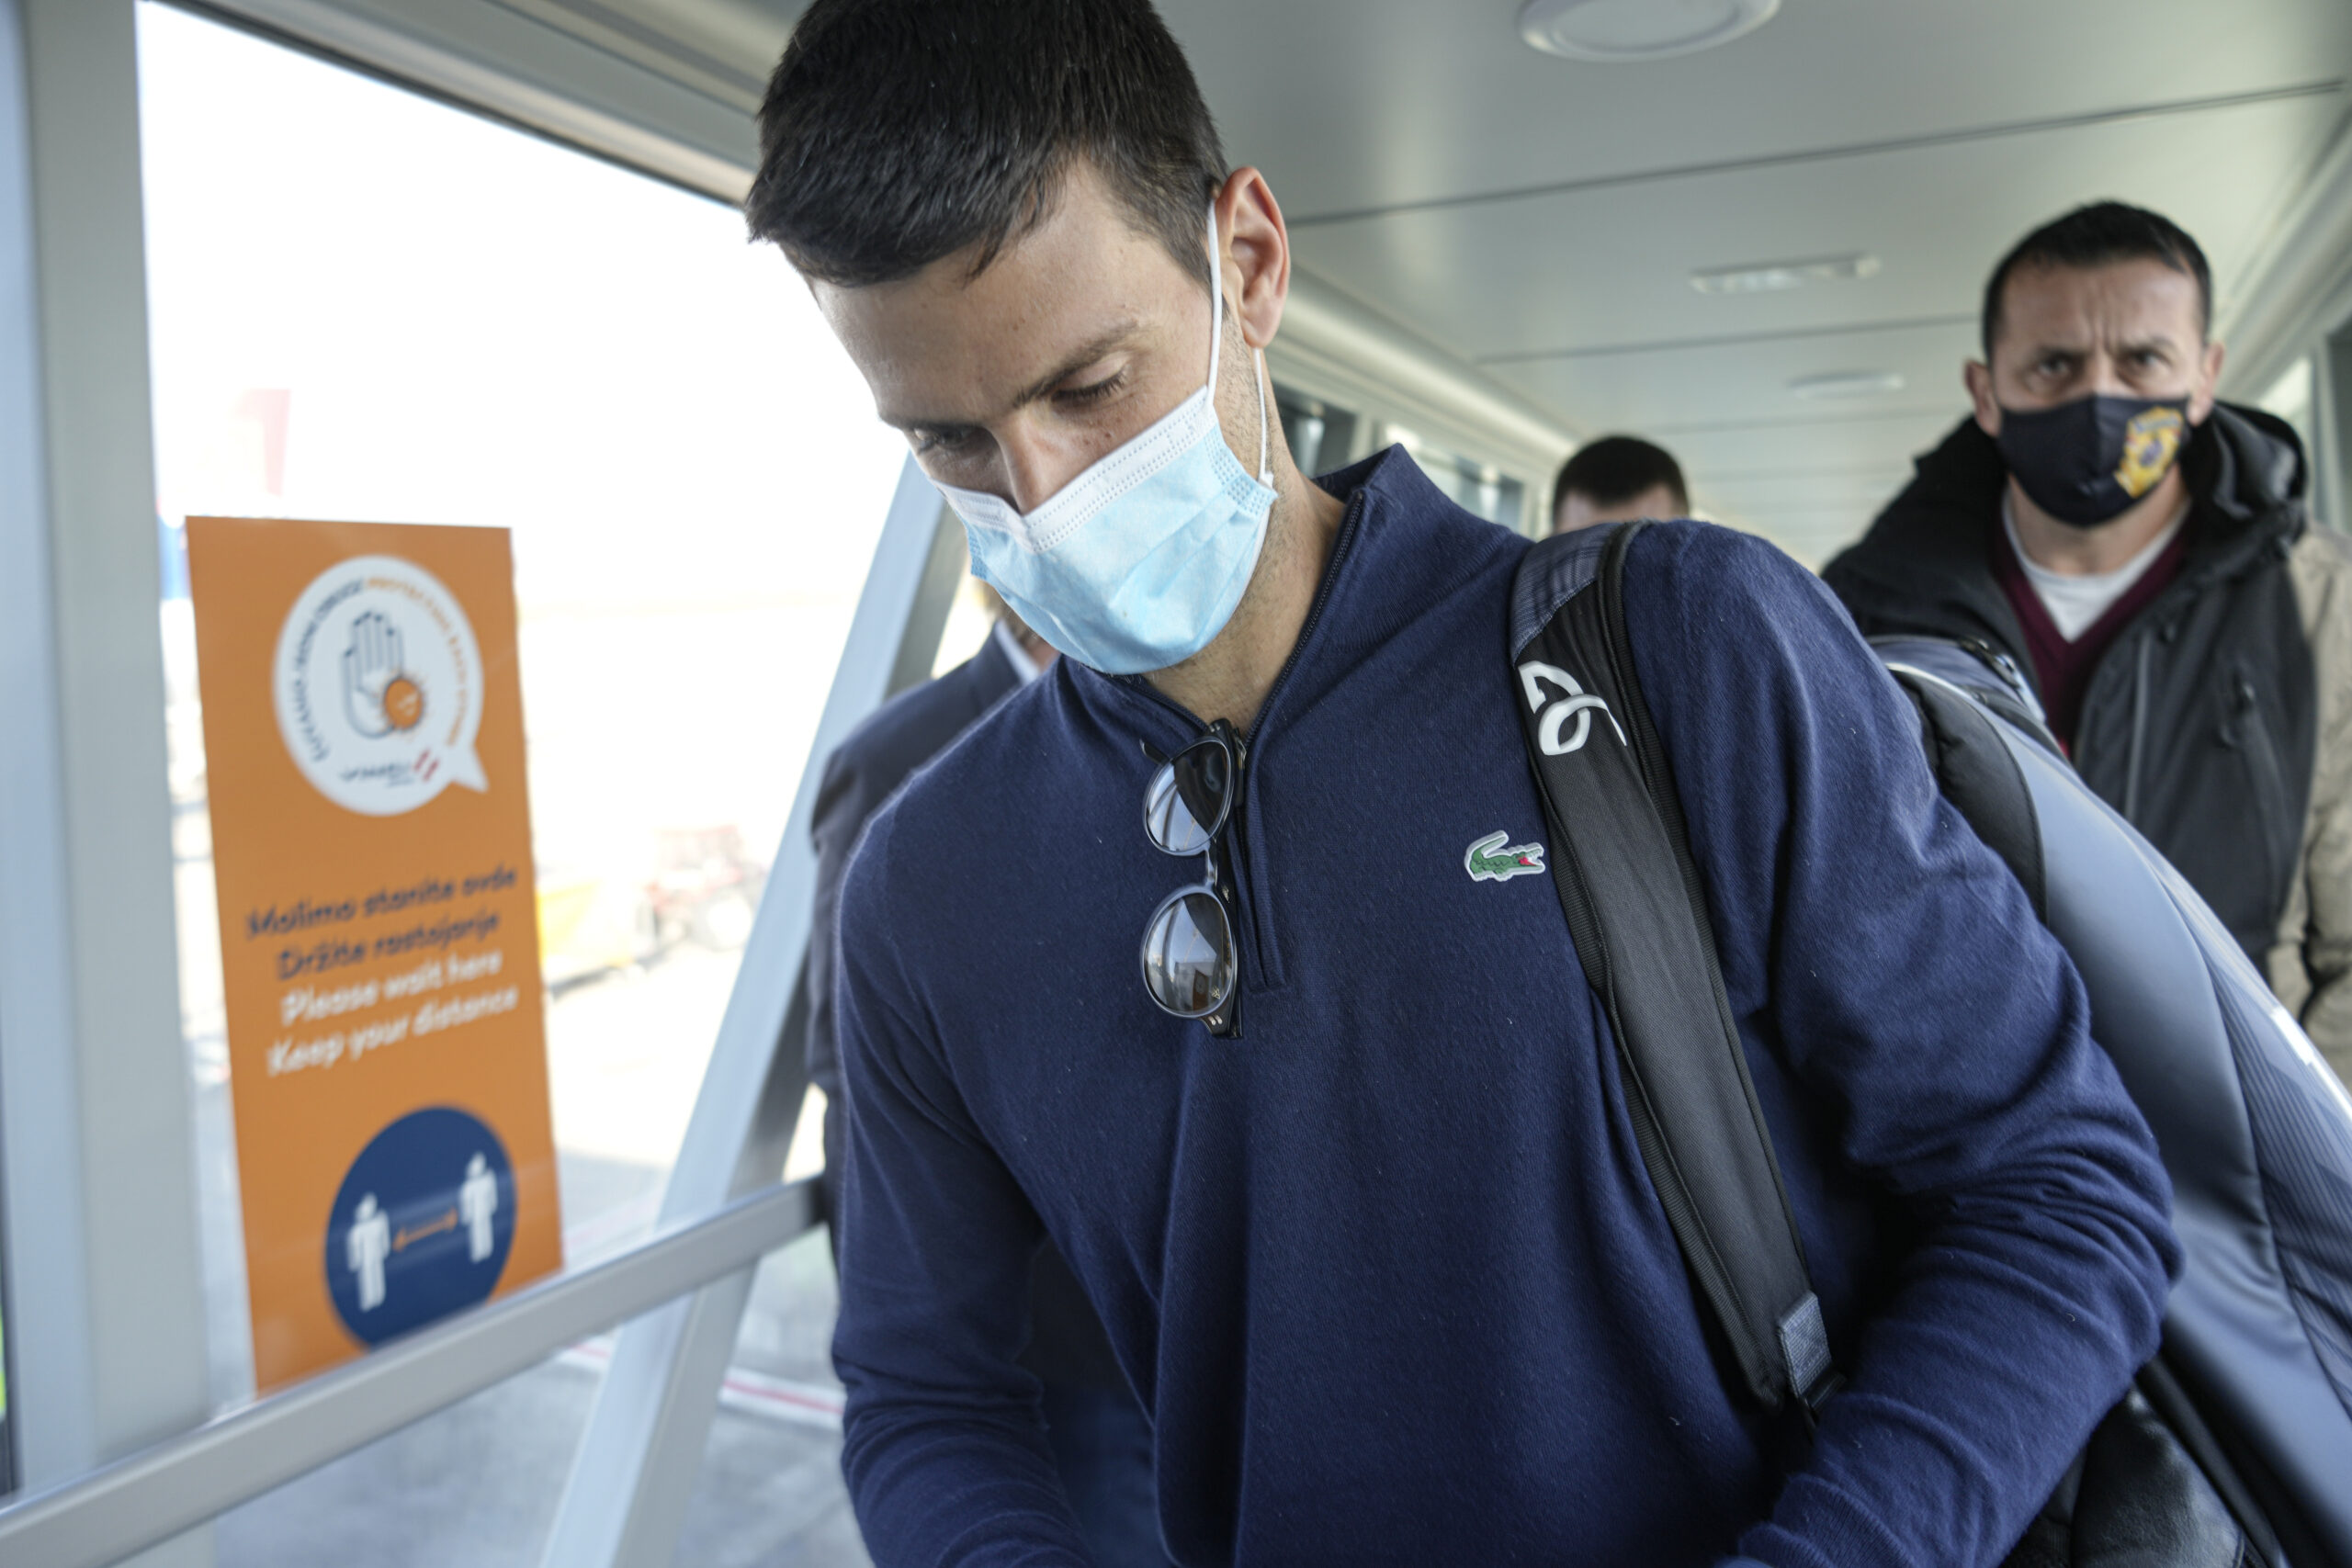 Novak Djokovic looks as his documents after landing in Belgrade, Serbia, Monday, Jan. 17, 2022. Djokovic arrived in the Serbian capital following his deportation from Australia on Sunday after losing a bid to stay in the country to defend his Australian Open title despite not being vaccinated against COVID-19.(AP Photo/Darko Bandic)